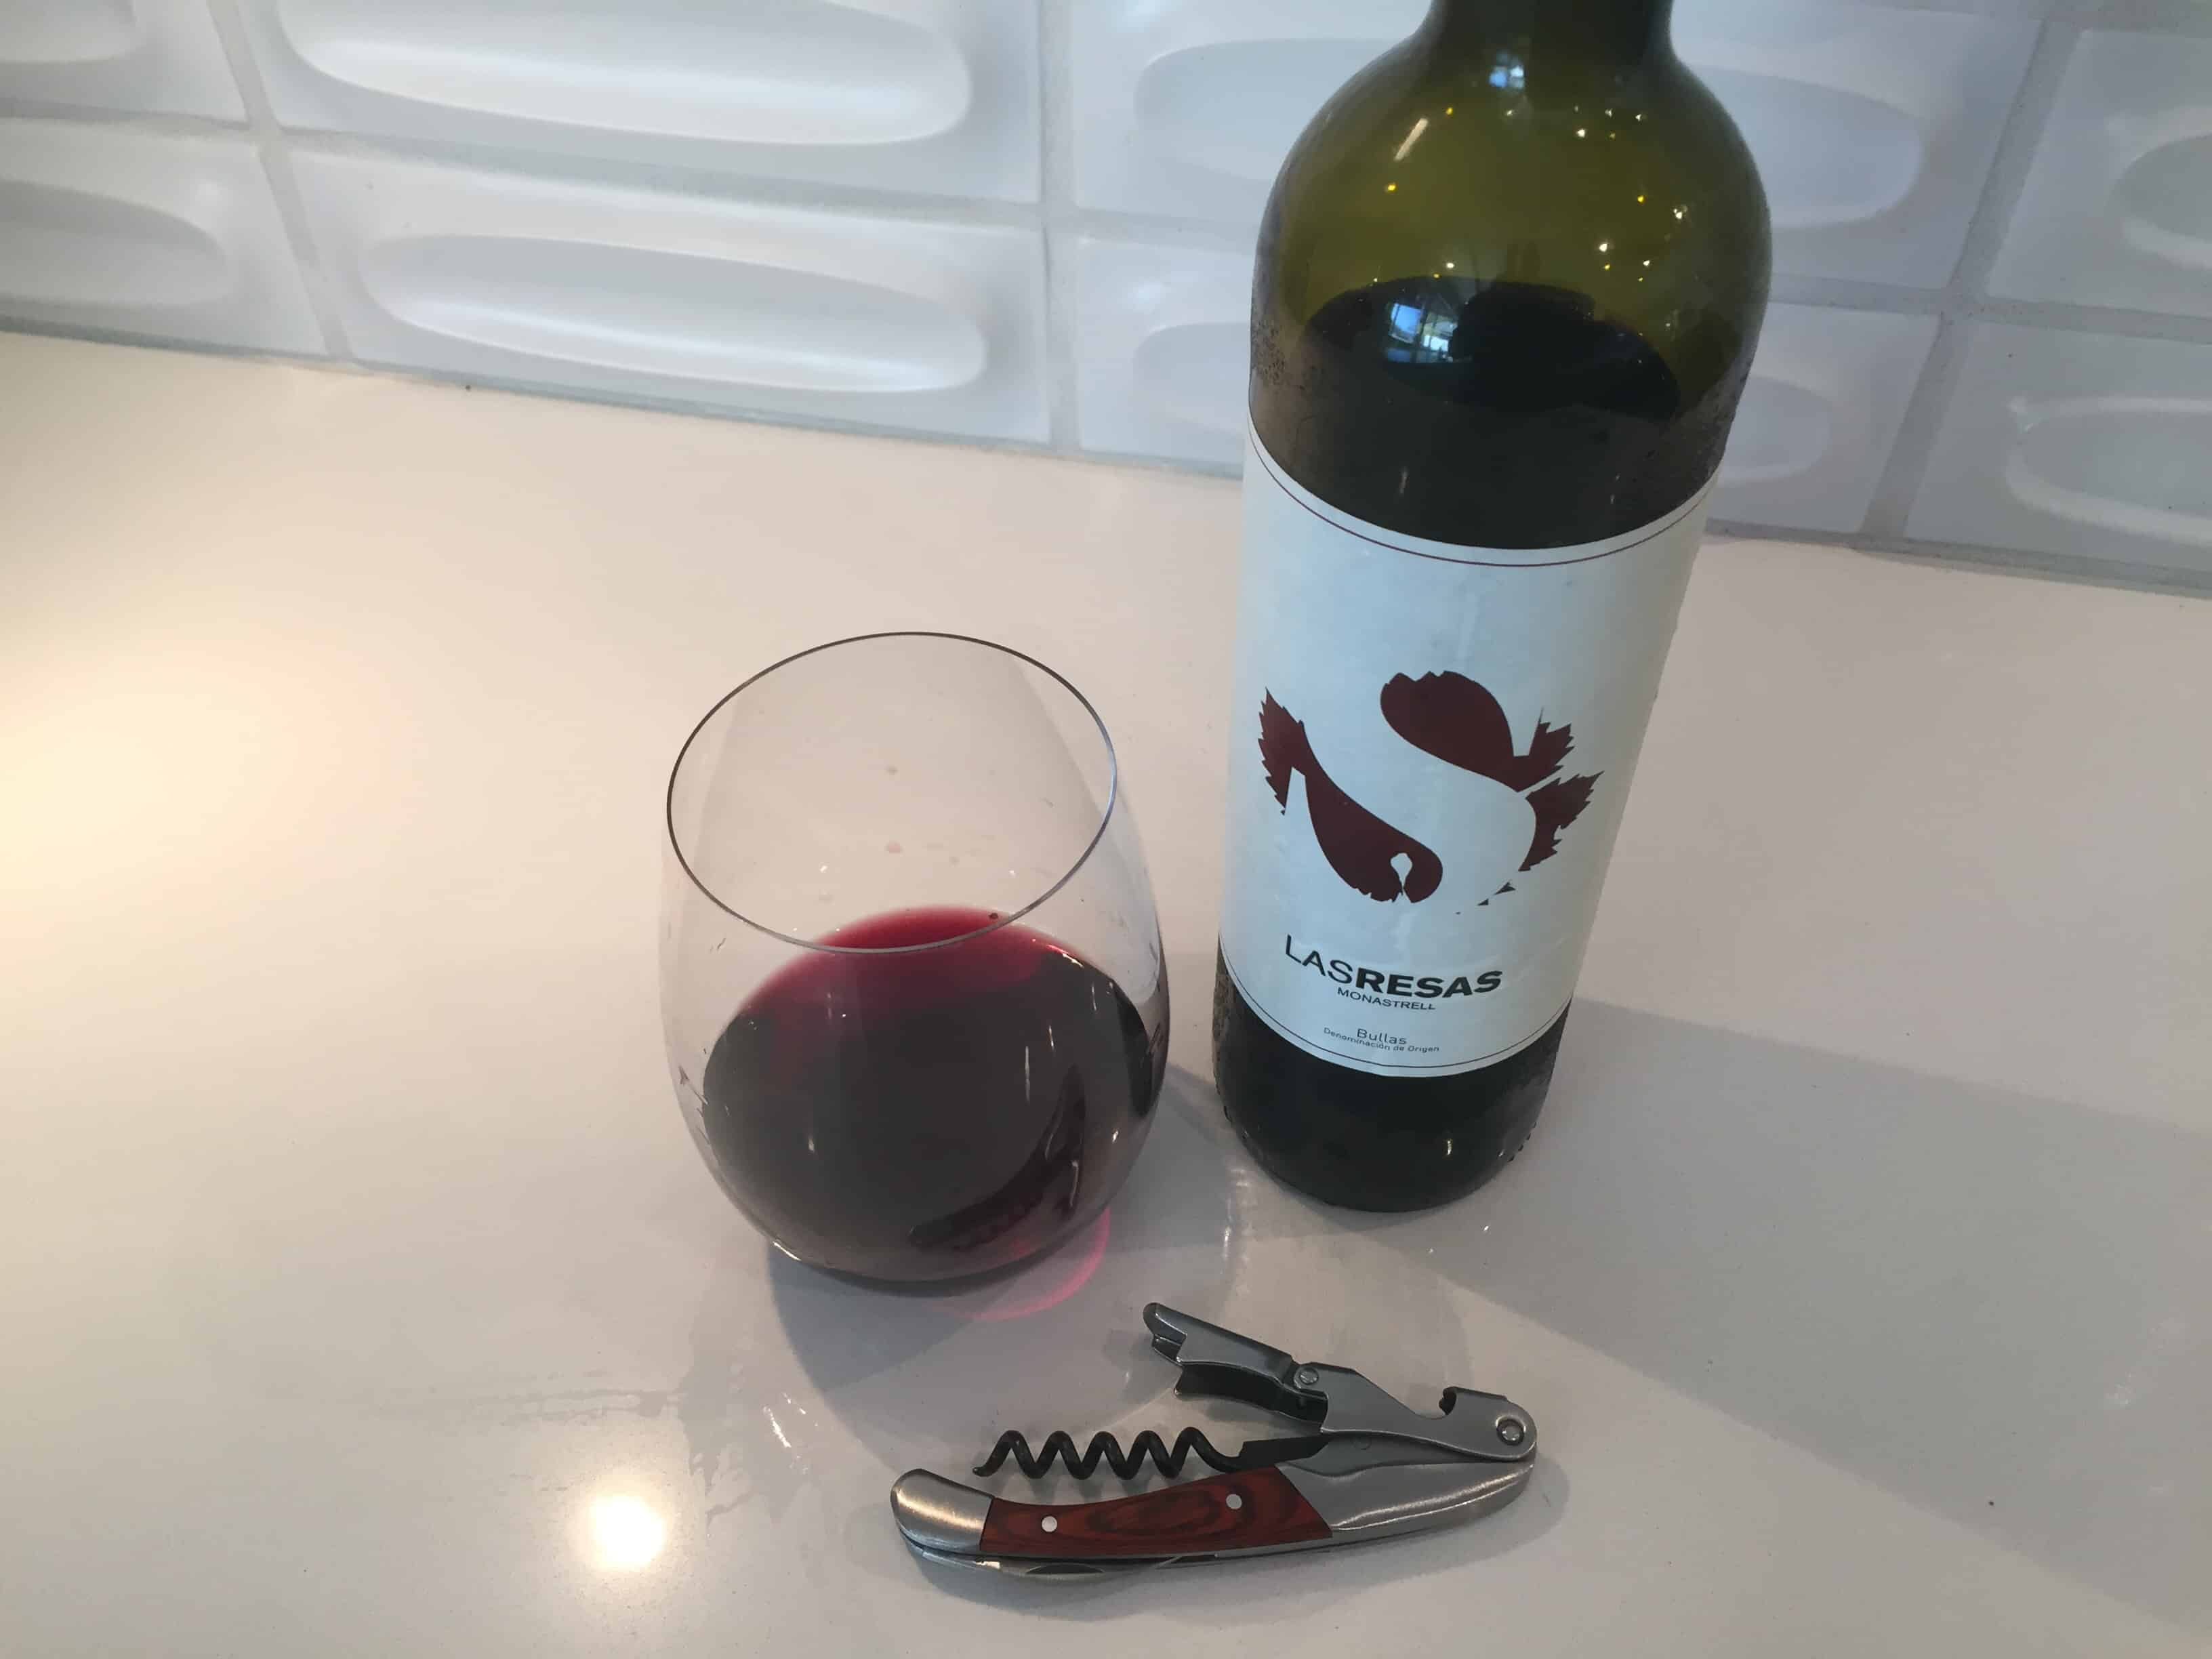 Bottle and glass of Las Resas 2017 Monastrell from Trader Joe's